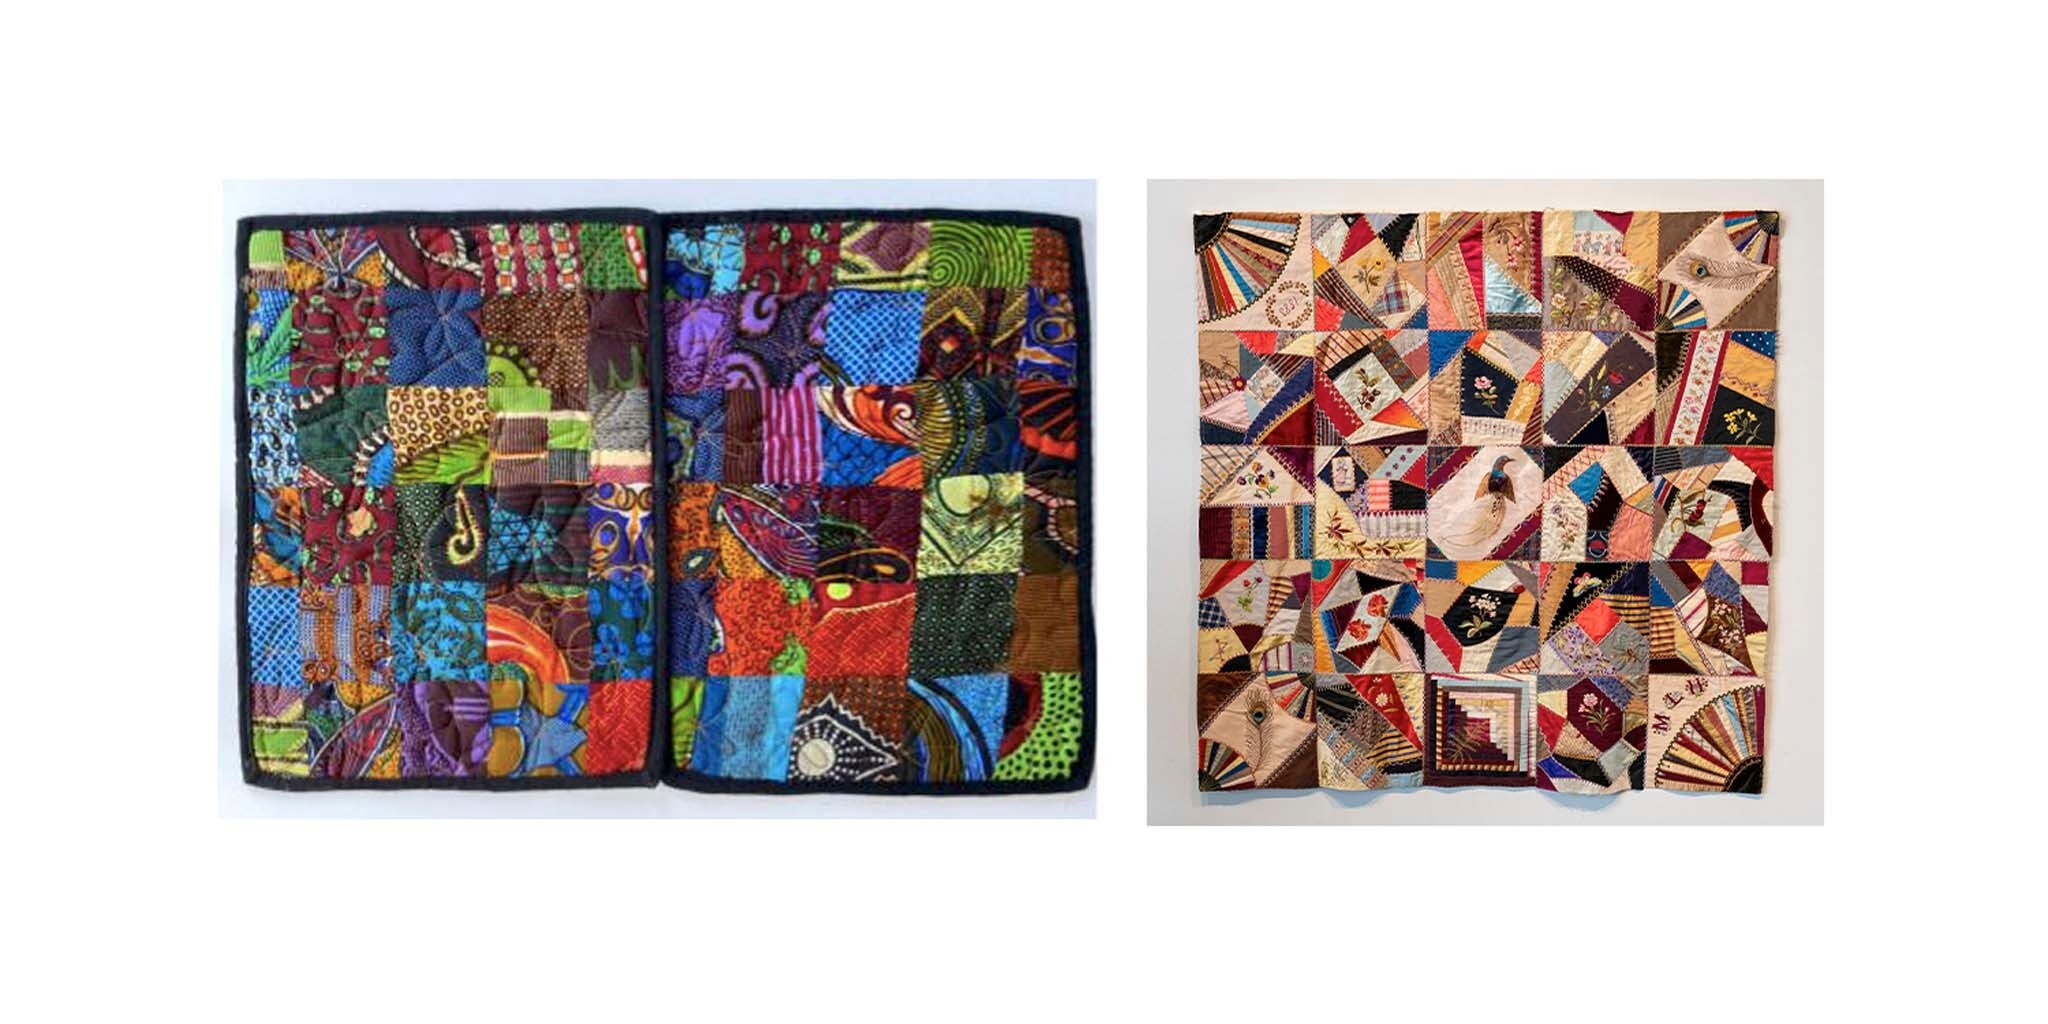 Meera Ratte '21 [on _crazy quilt top_ by an unrecorded artist, 1883, silk, velvet, and other fabrics, 54 1/2 x 54 1/2 inches, Donor unknown, TX2006.14](https://tang.skidmore.edu/collection/artworks/2211-crazy-quilt-top)